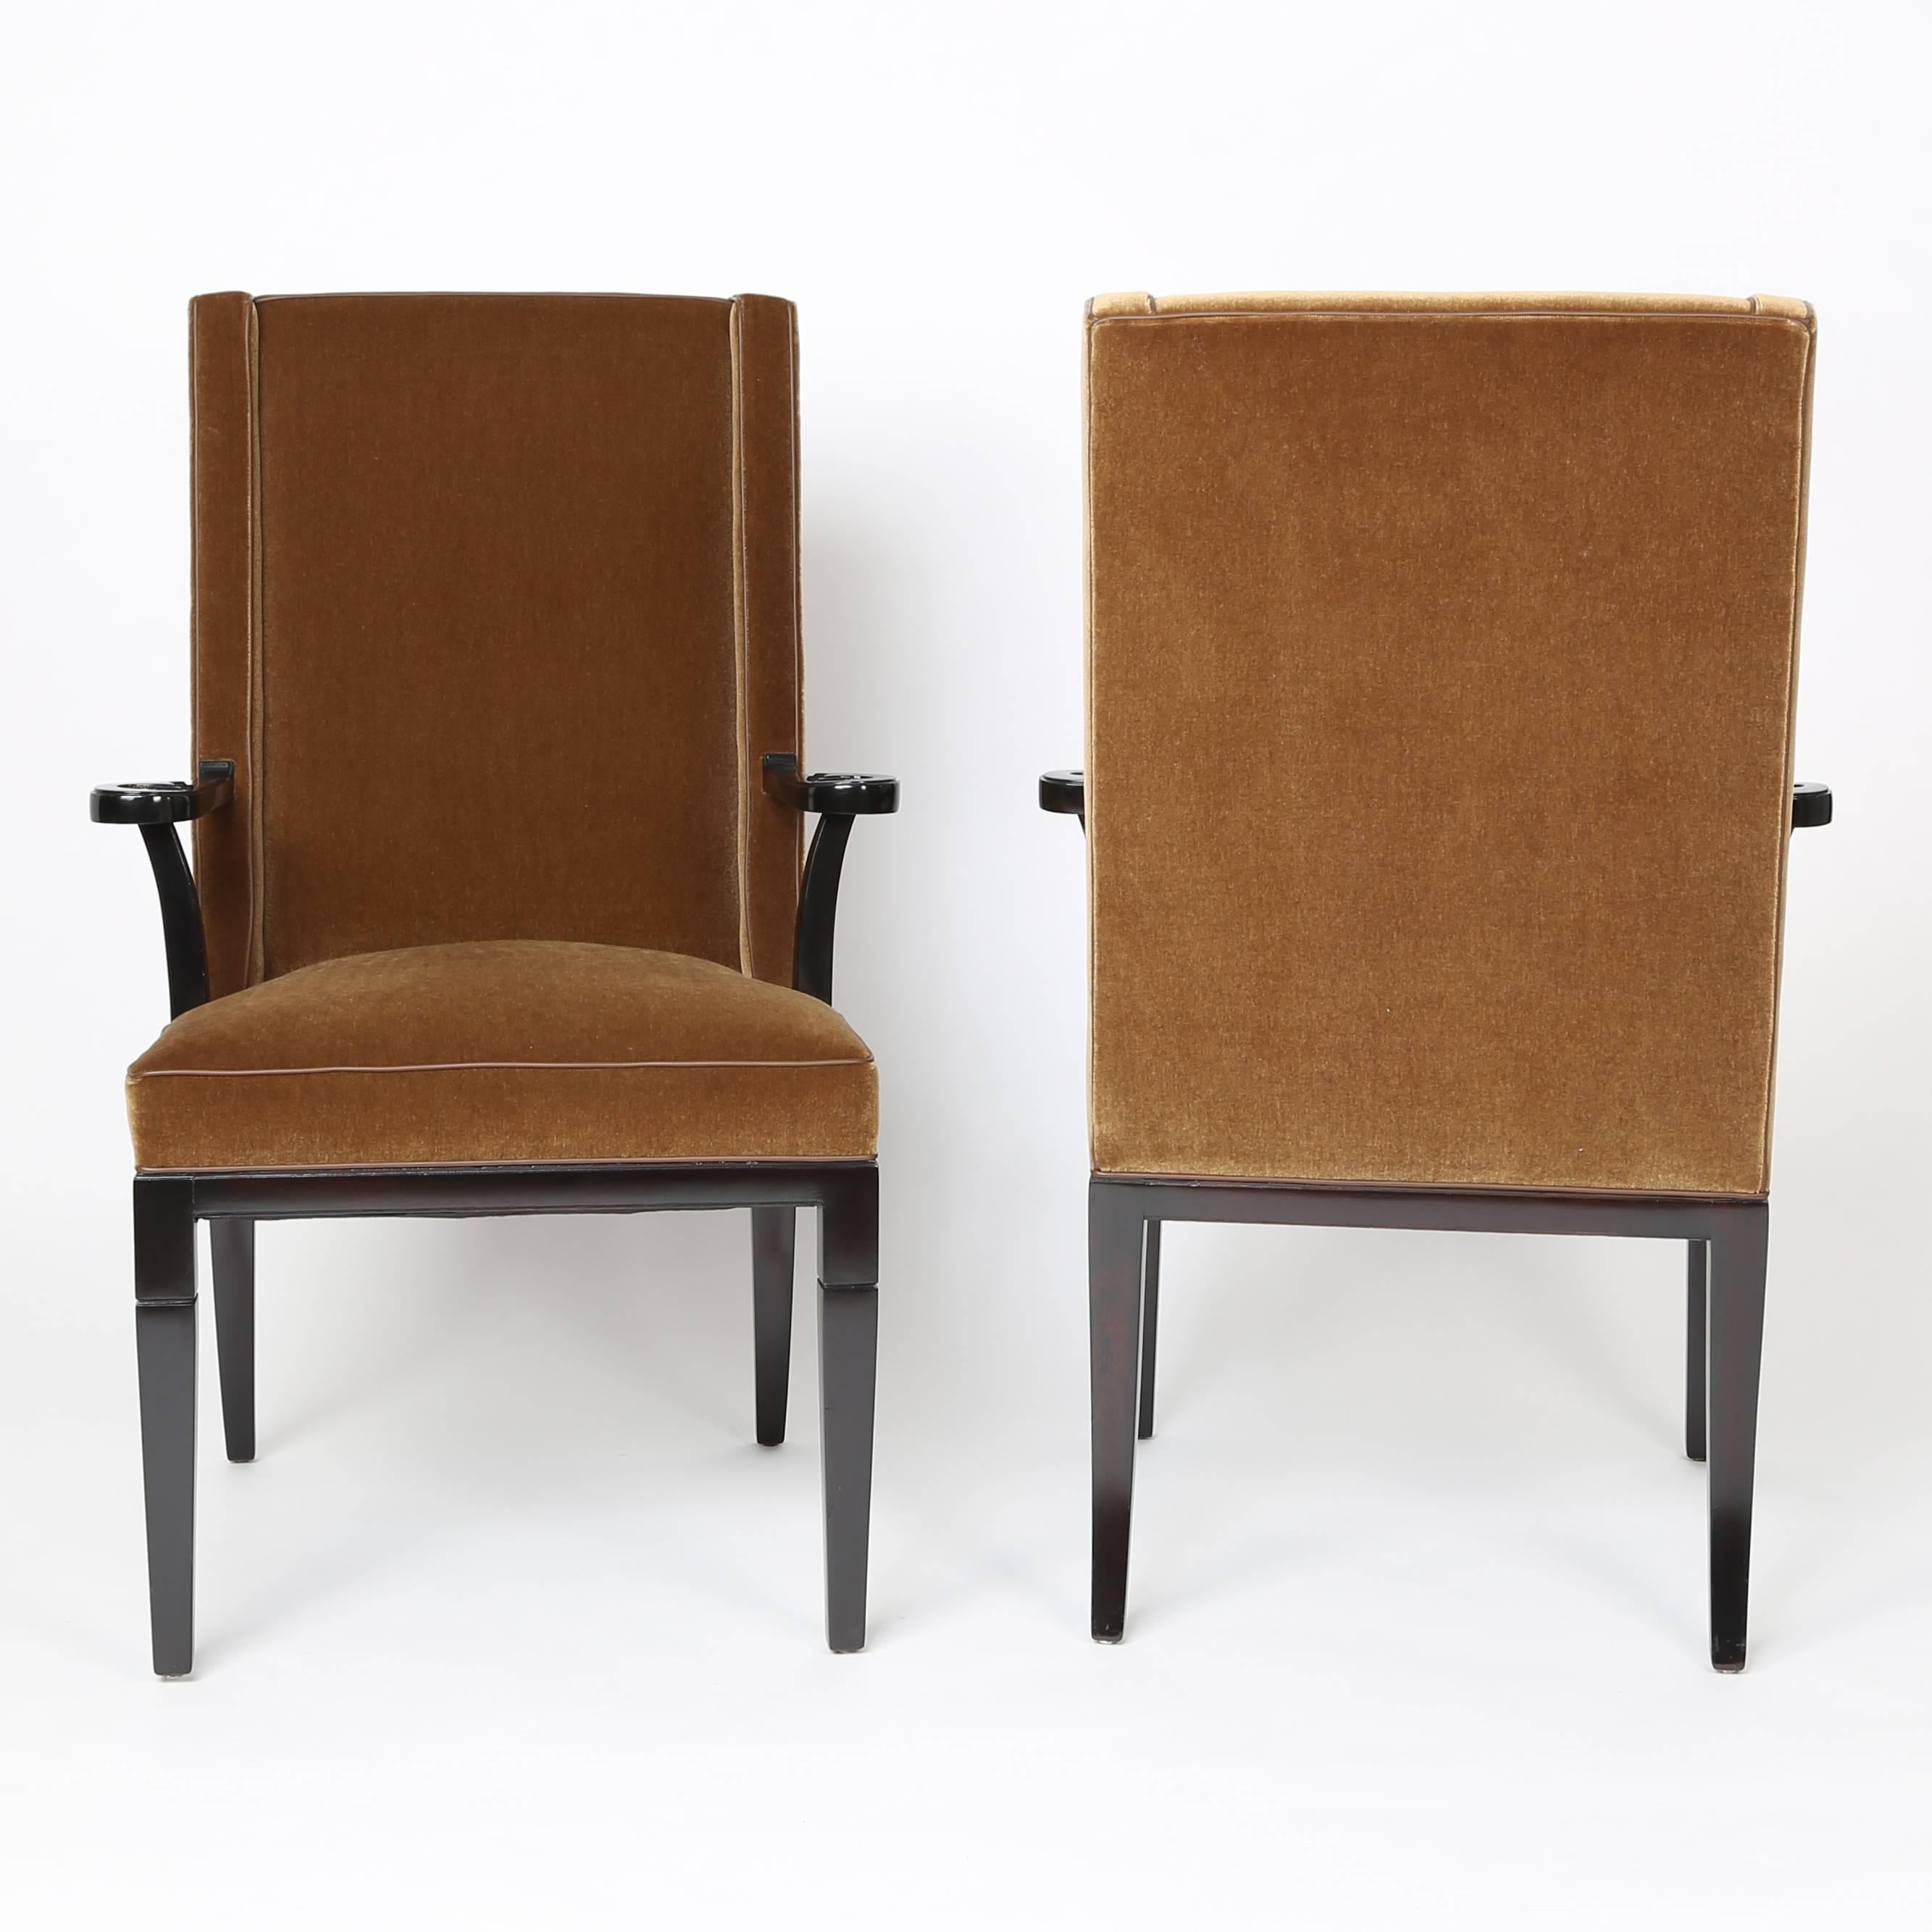 Pair of Armchairs by Tommi Parzinger for Charak Modern, circa 1940s In Good Condition For Sale In Brooklyn, NY